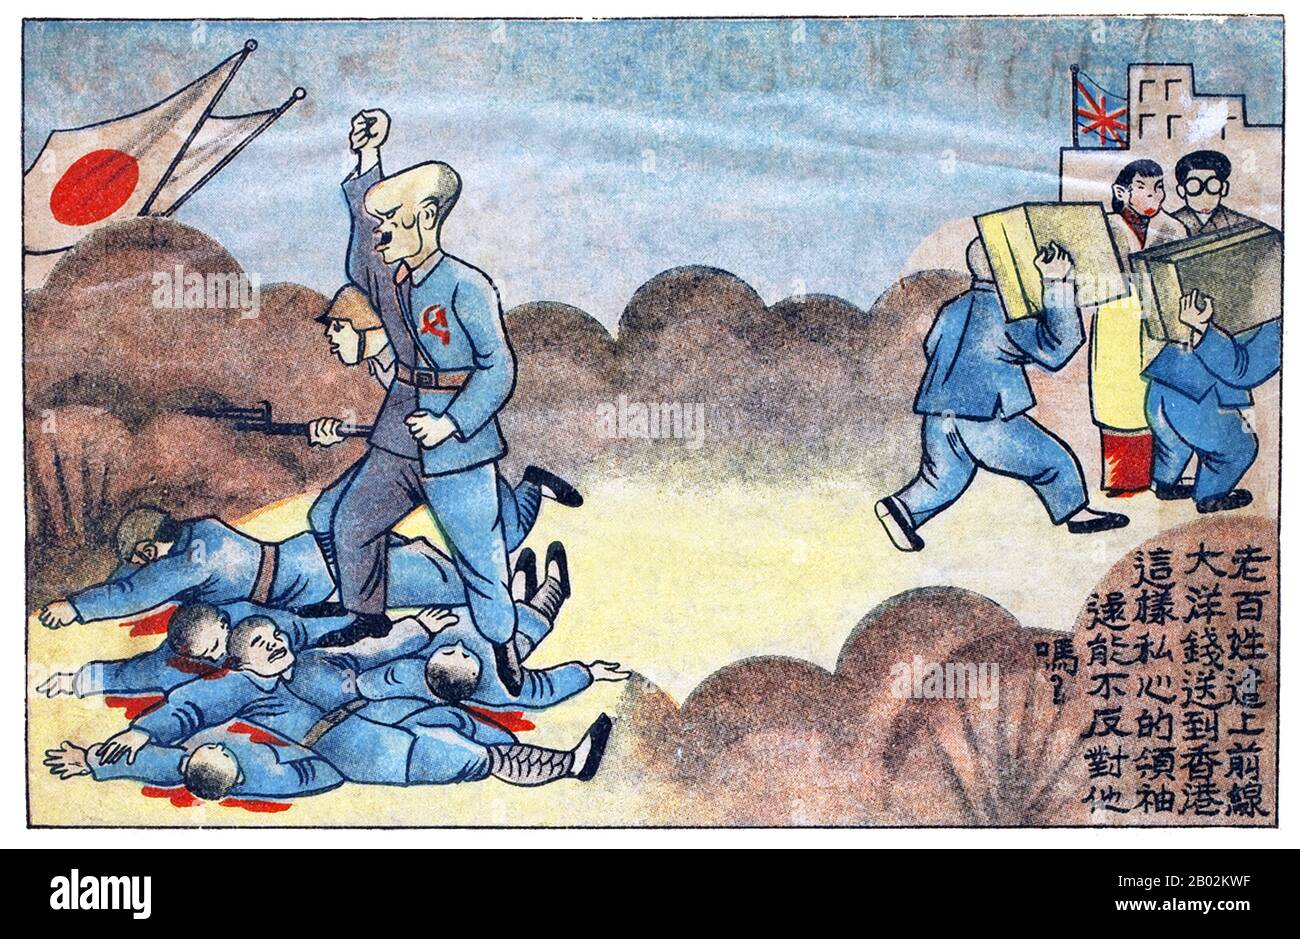 The Second Sino-Japanese War (July 7, 1937 – September 9, 1945) was a military conflict fought primarily between the Republic of China and the Empire of Japan. After the Japanese attack on Pearl Harbor, the war merged into the greater conflict of World War II as a major front of what is broadly known as the Pacific War.  Although the two countries had fought intermittently since 1931, total war started in earnest in 1937 and ended only with the surrender of Japan in 1945. The war was the result of a decades-long Japanese imperialist policy aiming to dominate China politically and militarily an Stock Photo